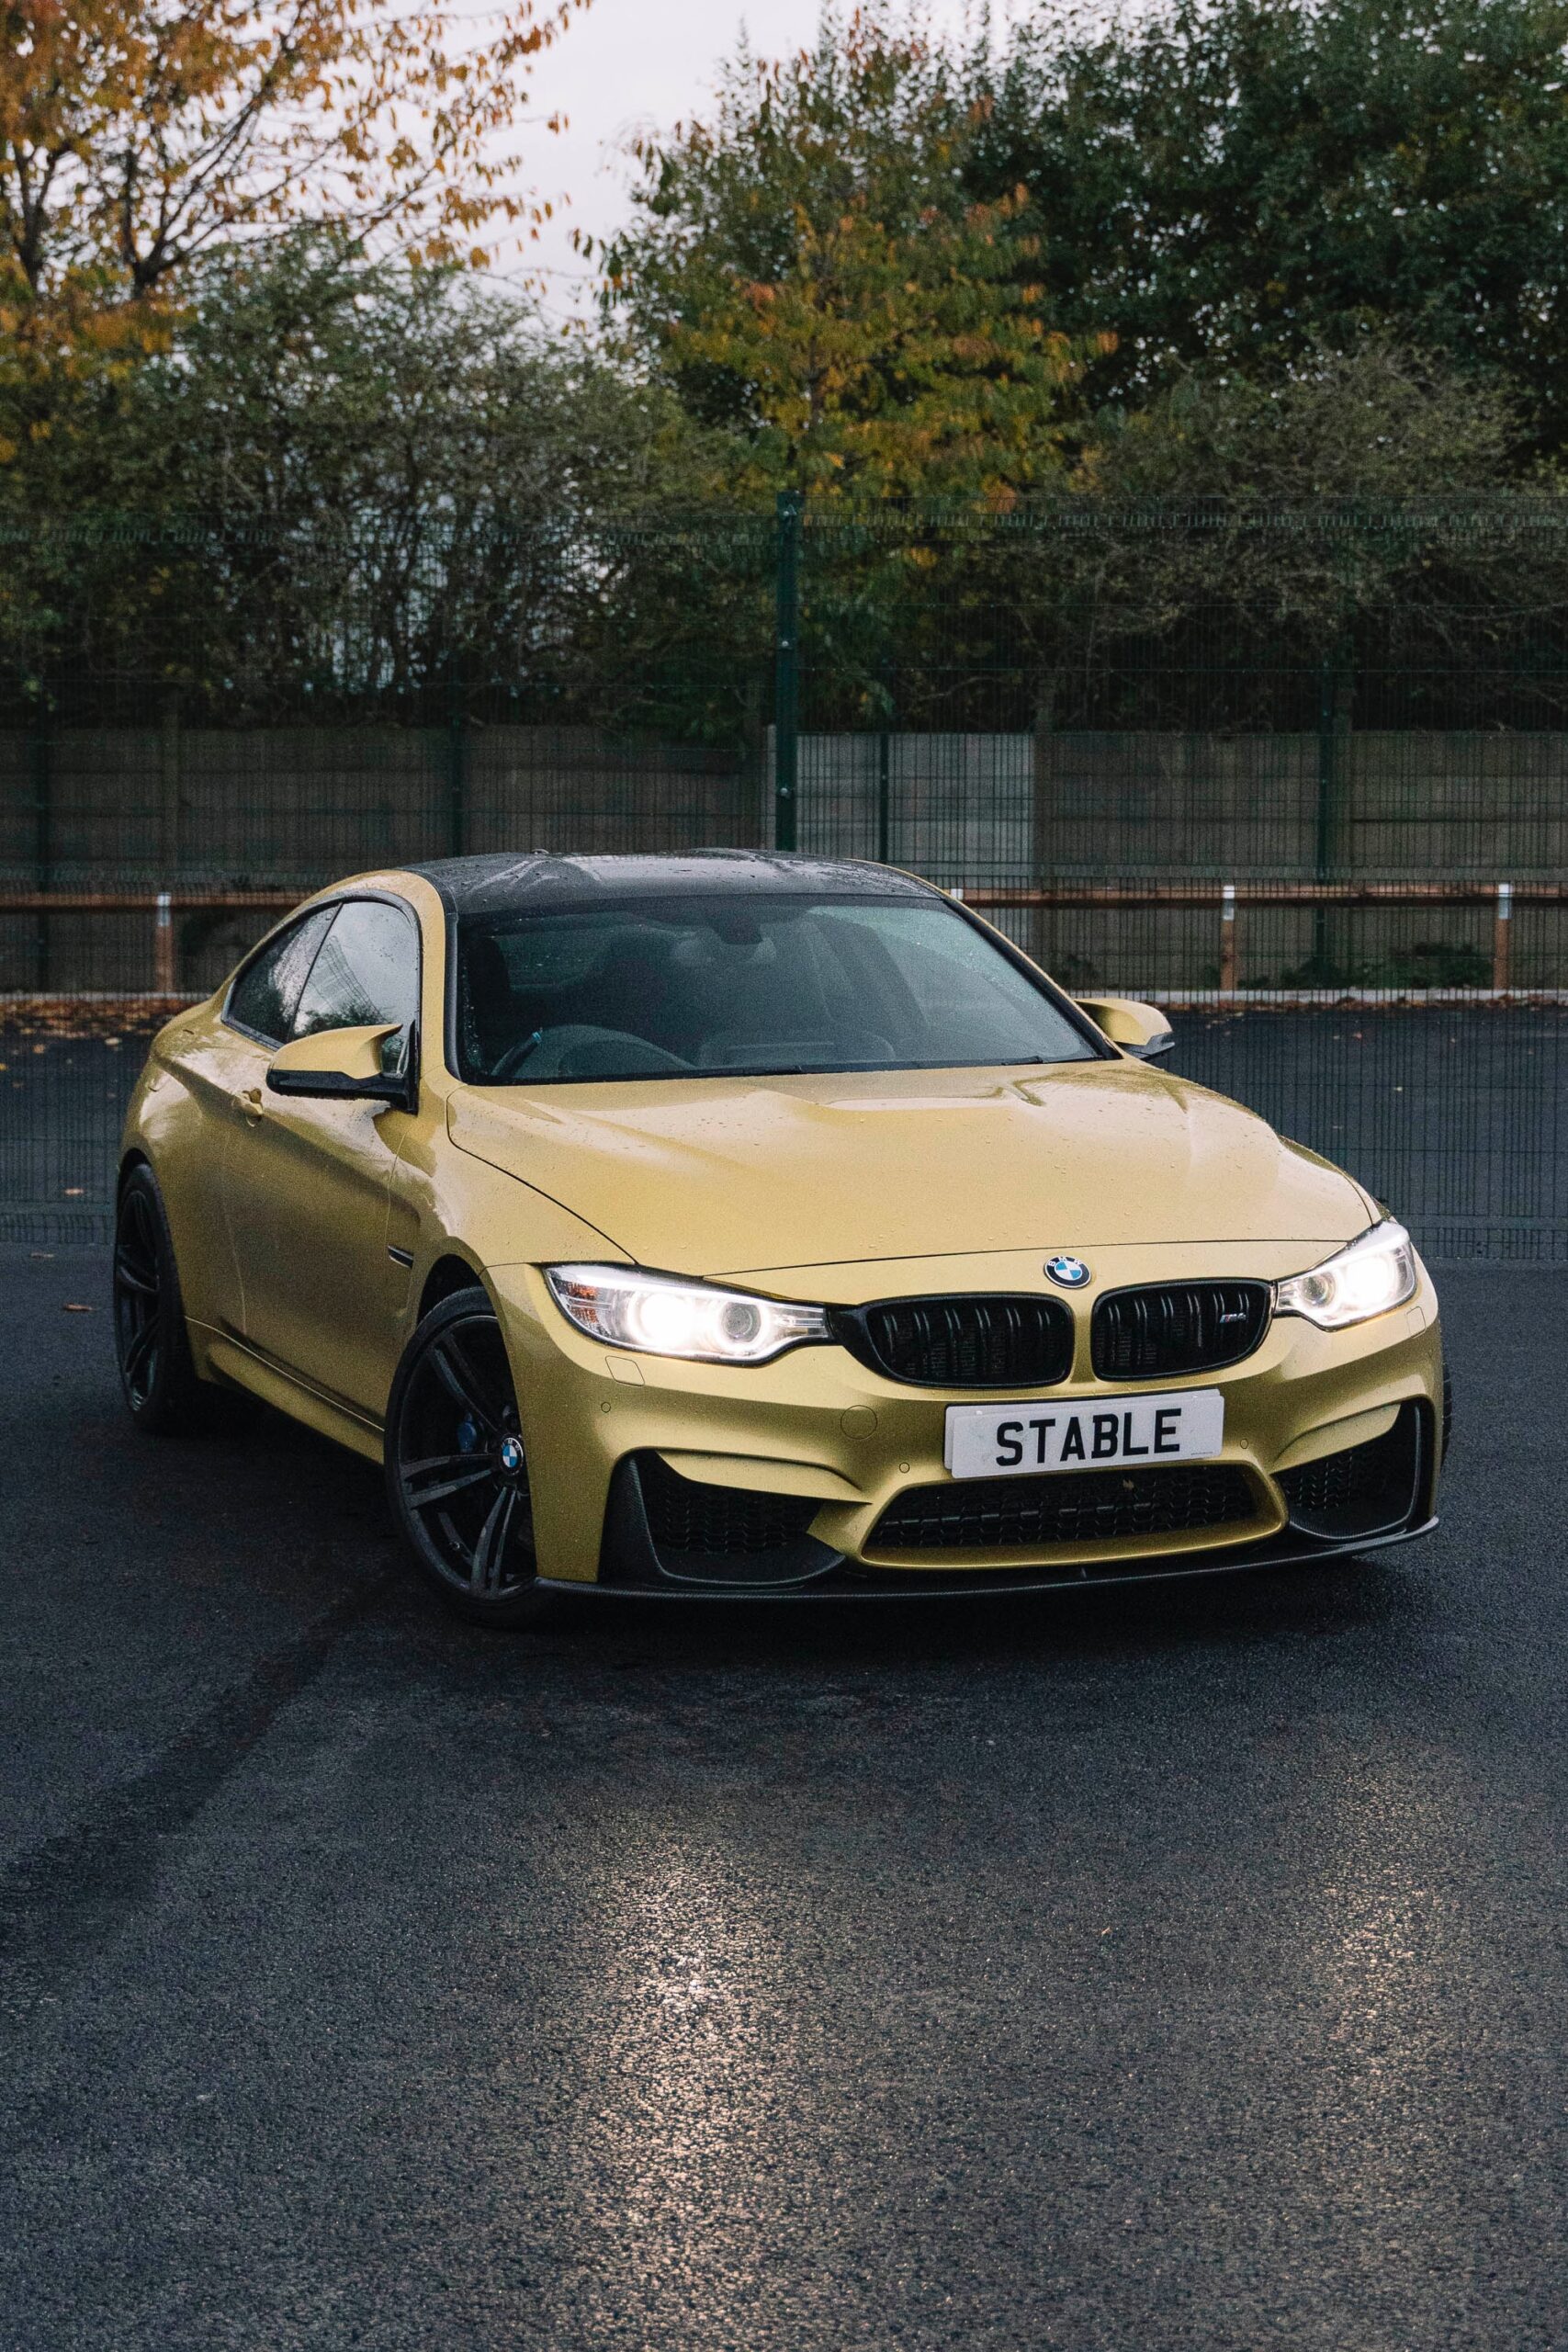 Reasons Why the BMW M4 Coupe Will Take Your Breath Away